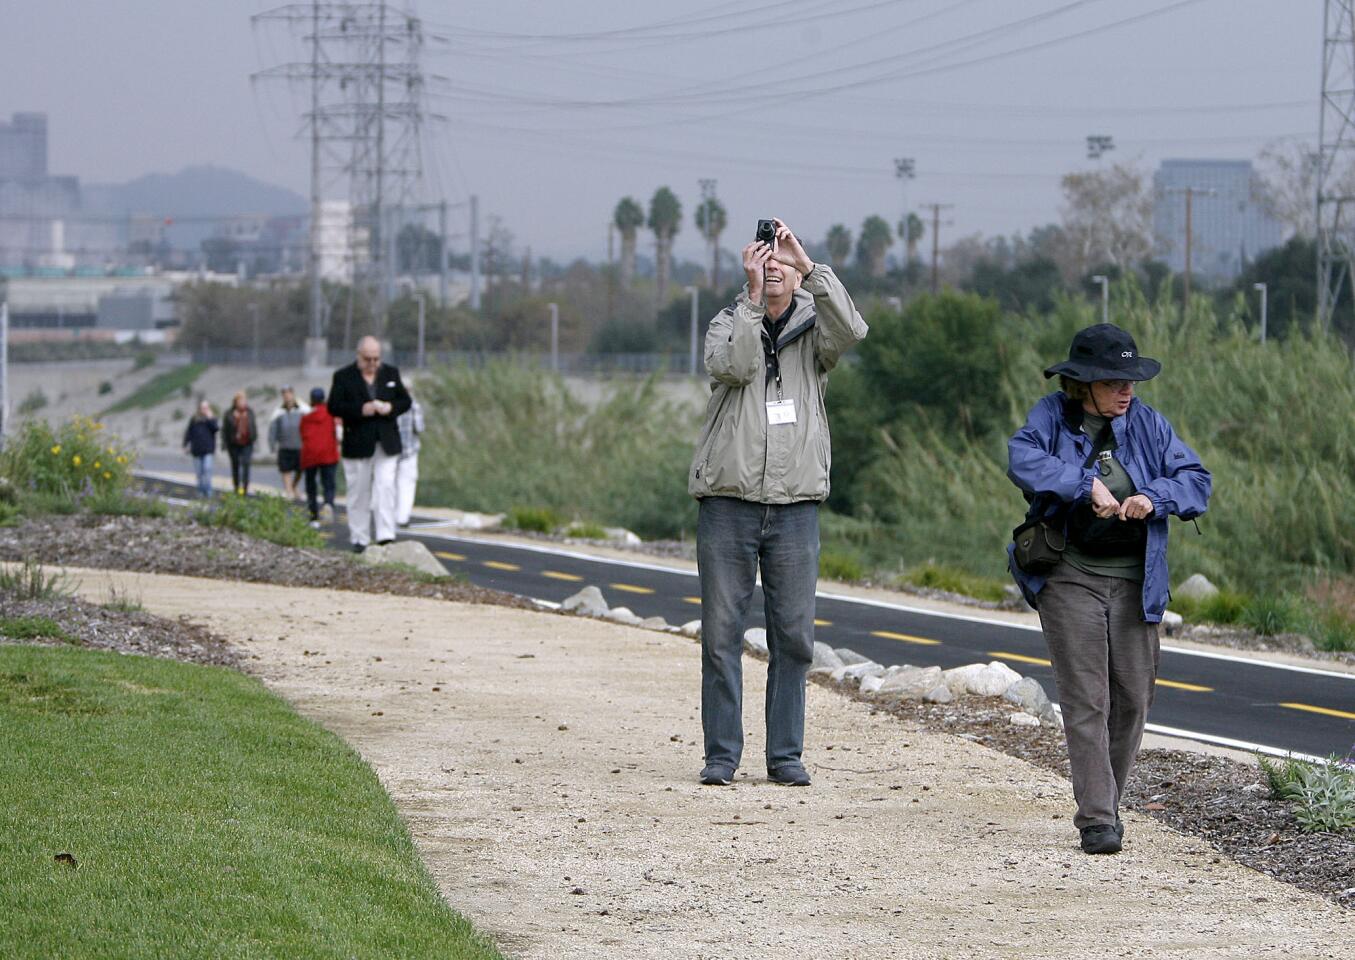 Bob Thompson takes a photo while Jeanne LeFever looks around during the grand opening of the Glendale Narrows Riverwalk in Glendale on Wednesday, December 12, 2012. Phase 1 of the project opened today at the corner of Paula and Garden Streets in Glendale with a ribbon cutting ceremony.